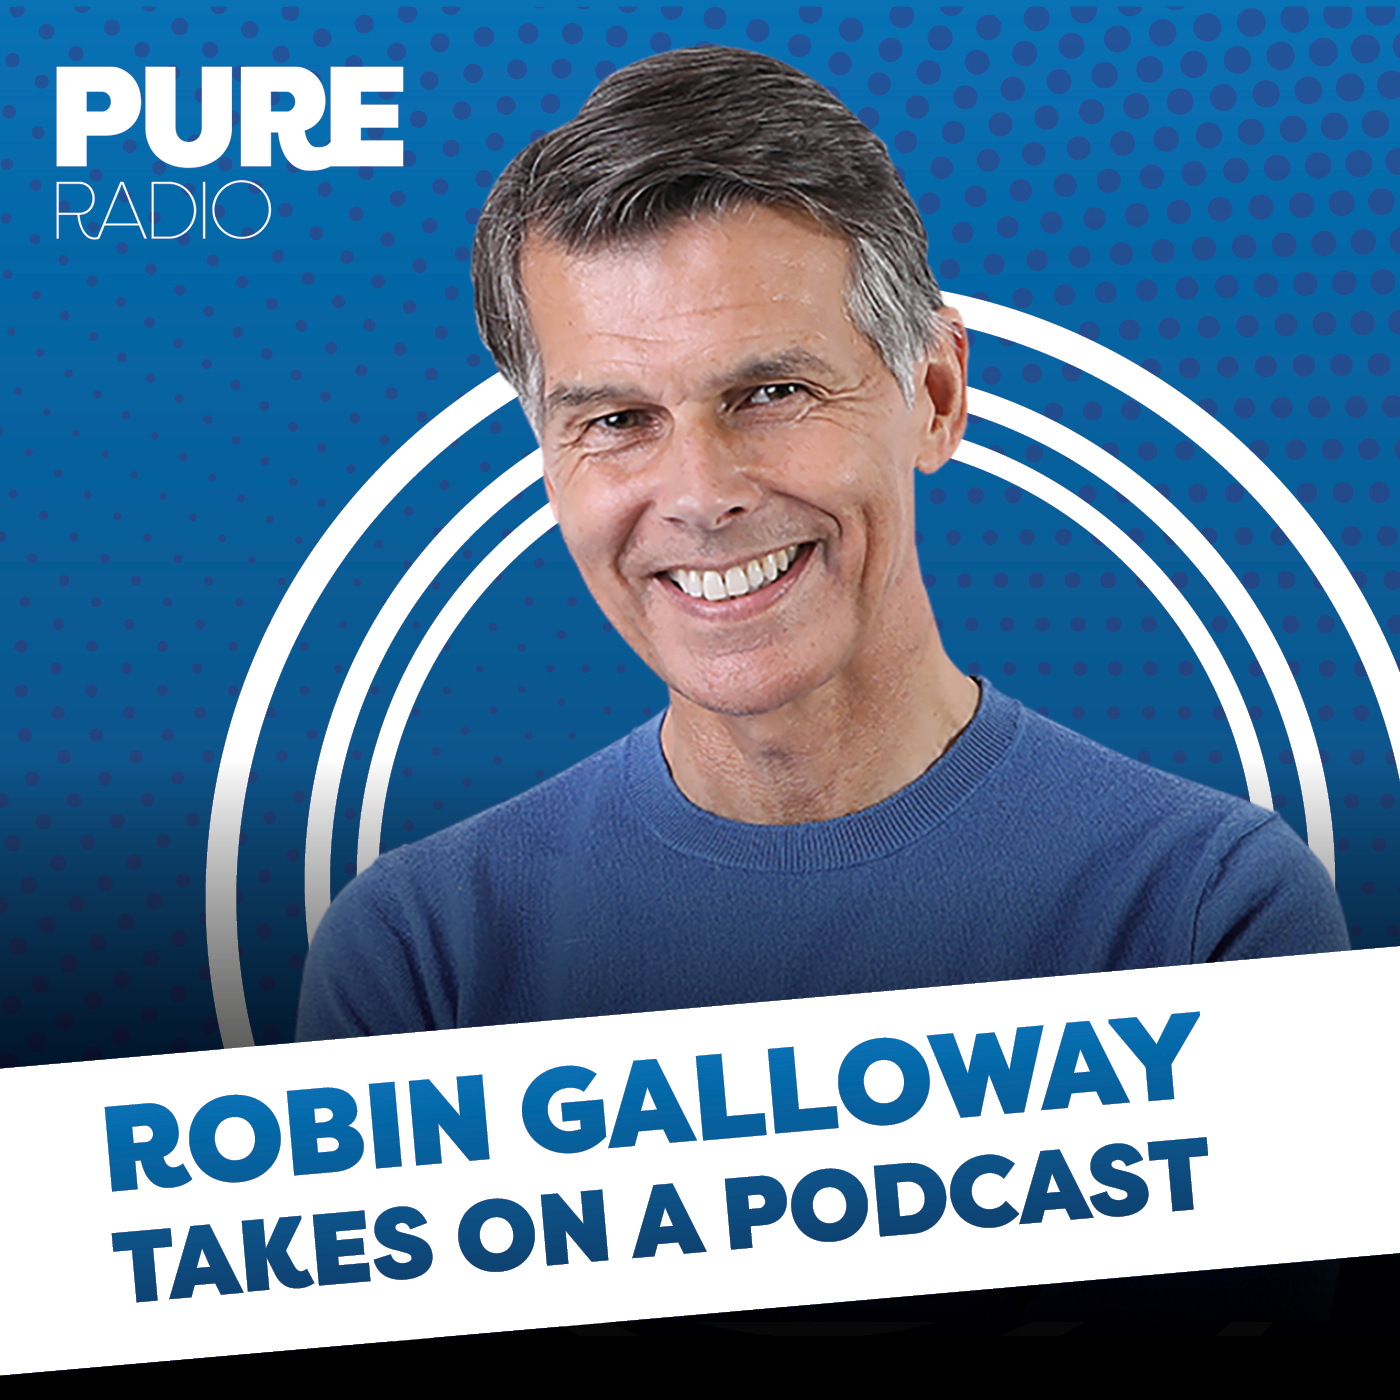 Robin Galloway Takes On a Podcast